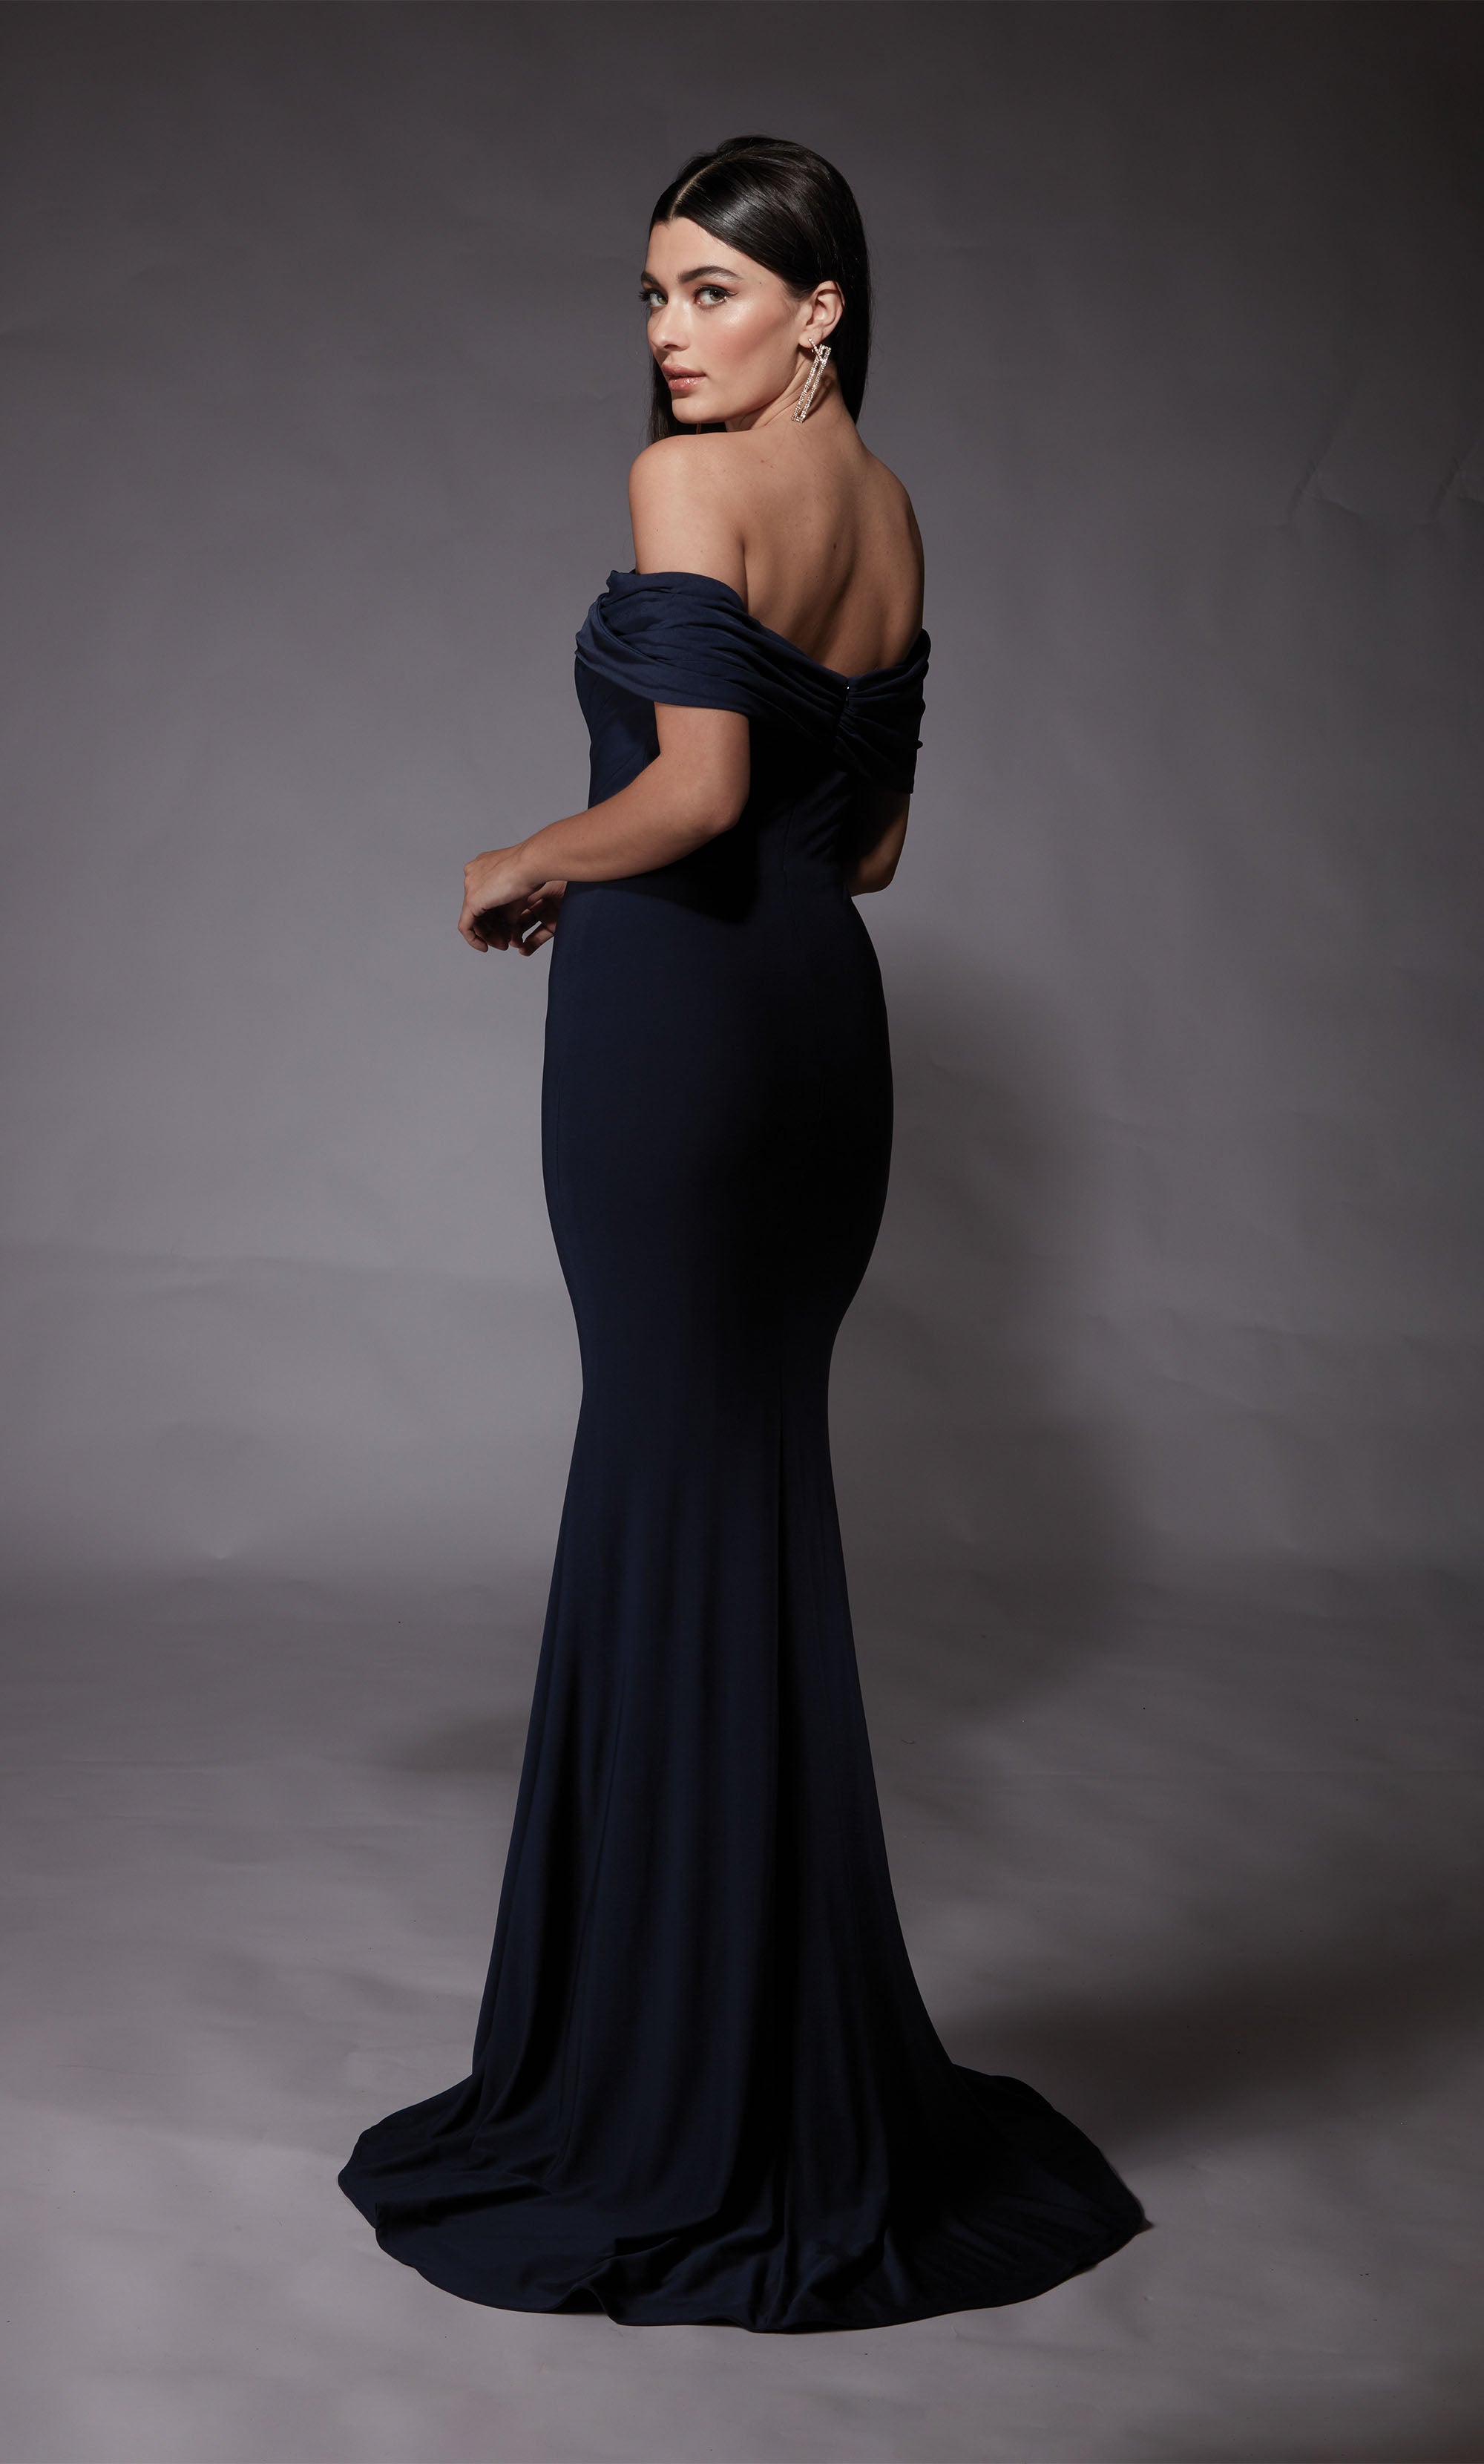 A navy evening gown with an off the shoulder neckline and fit an flare silhouette. The dress was crafted from a gorgeous Italian Jersey fabric.